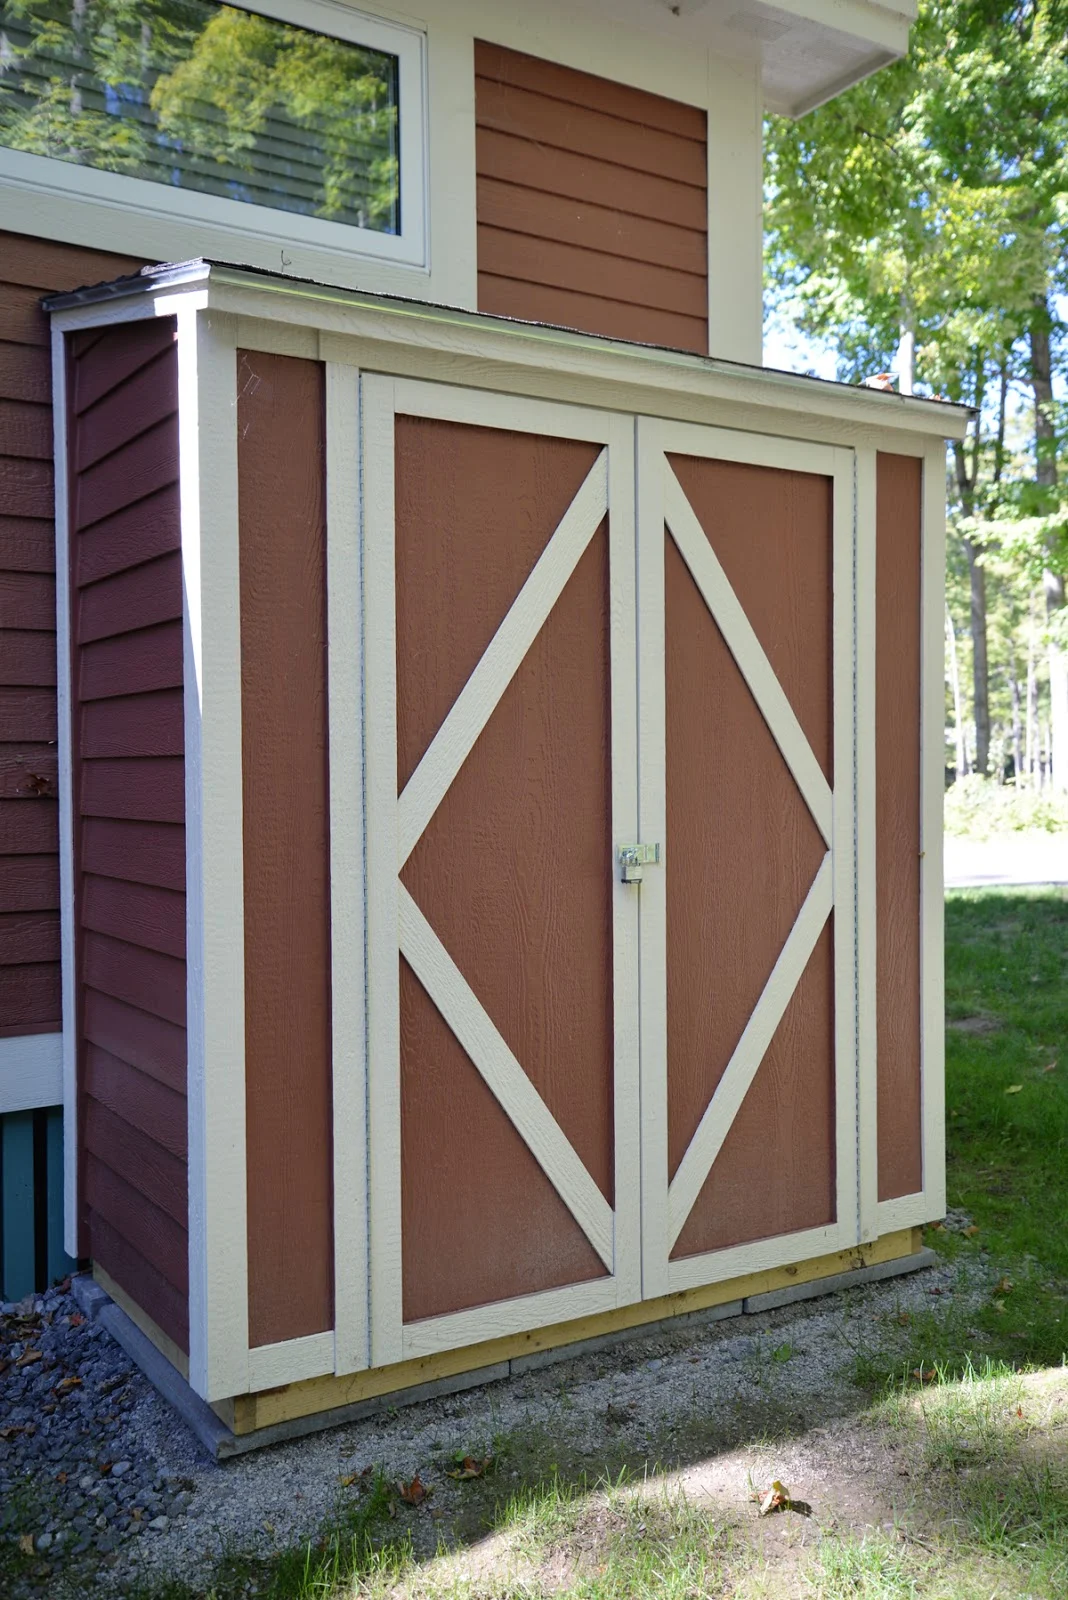 how to build a storage shed, lean to storage shed assembly, shed matching your house, Home Depot storage shed, customize your shed